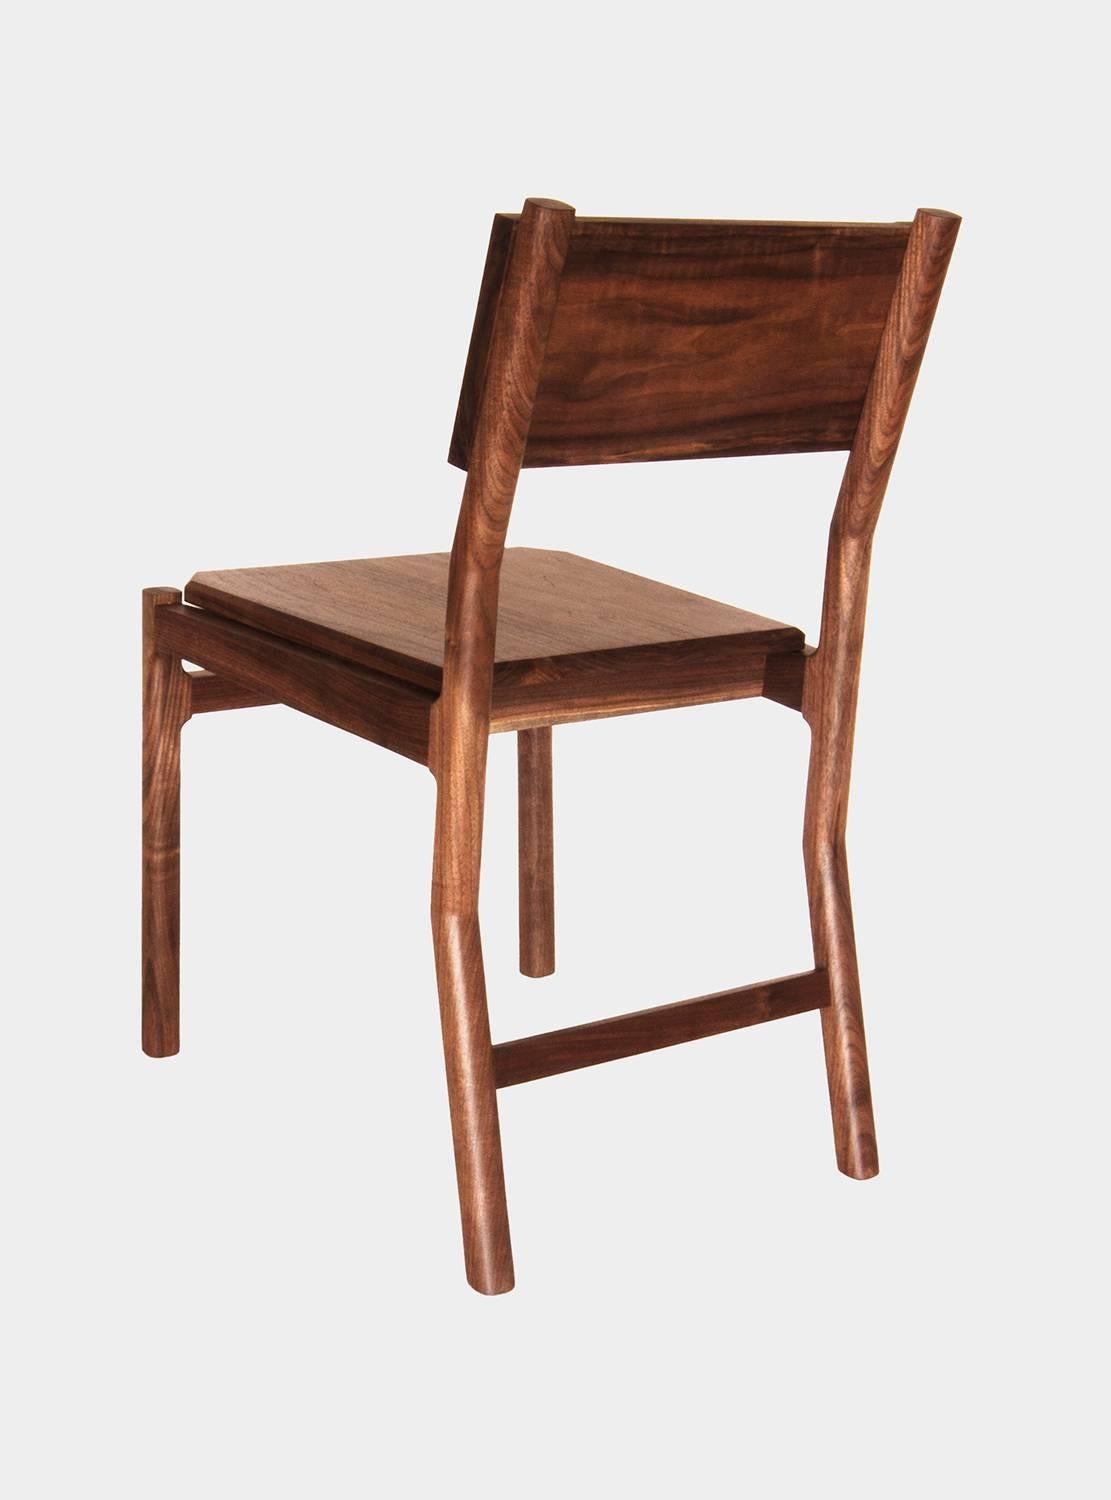 New York Heartwoods' contemporary black walnut Hewitt Dining Chair is influenced by Mid-century Modern and Shaker design, is fabricated for comfort, and features refined joinery, a hand-shaped backrest, faceted seat, and NYH's signature teardrop